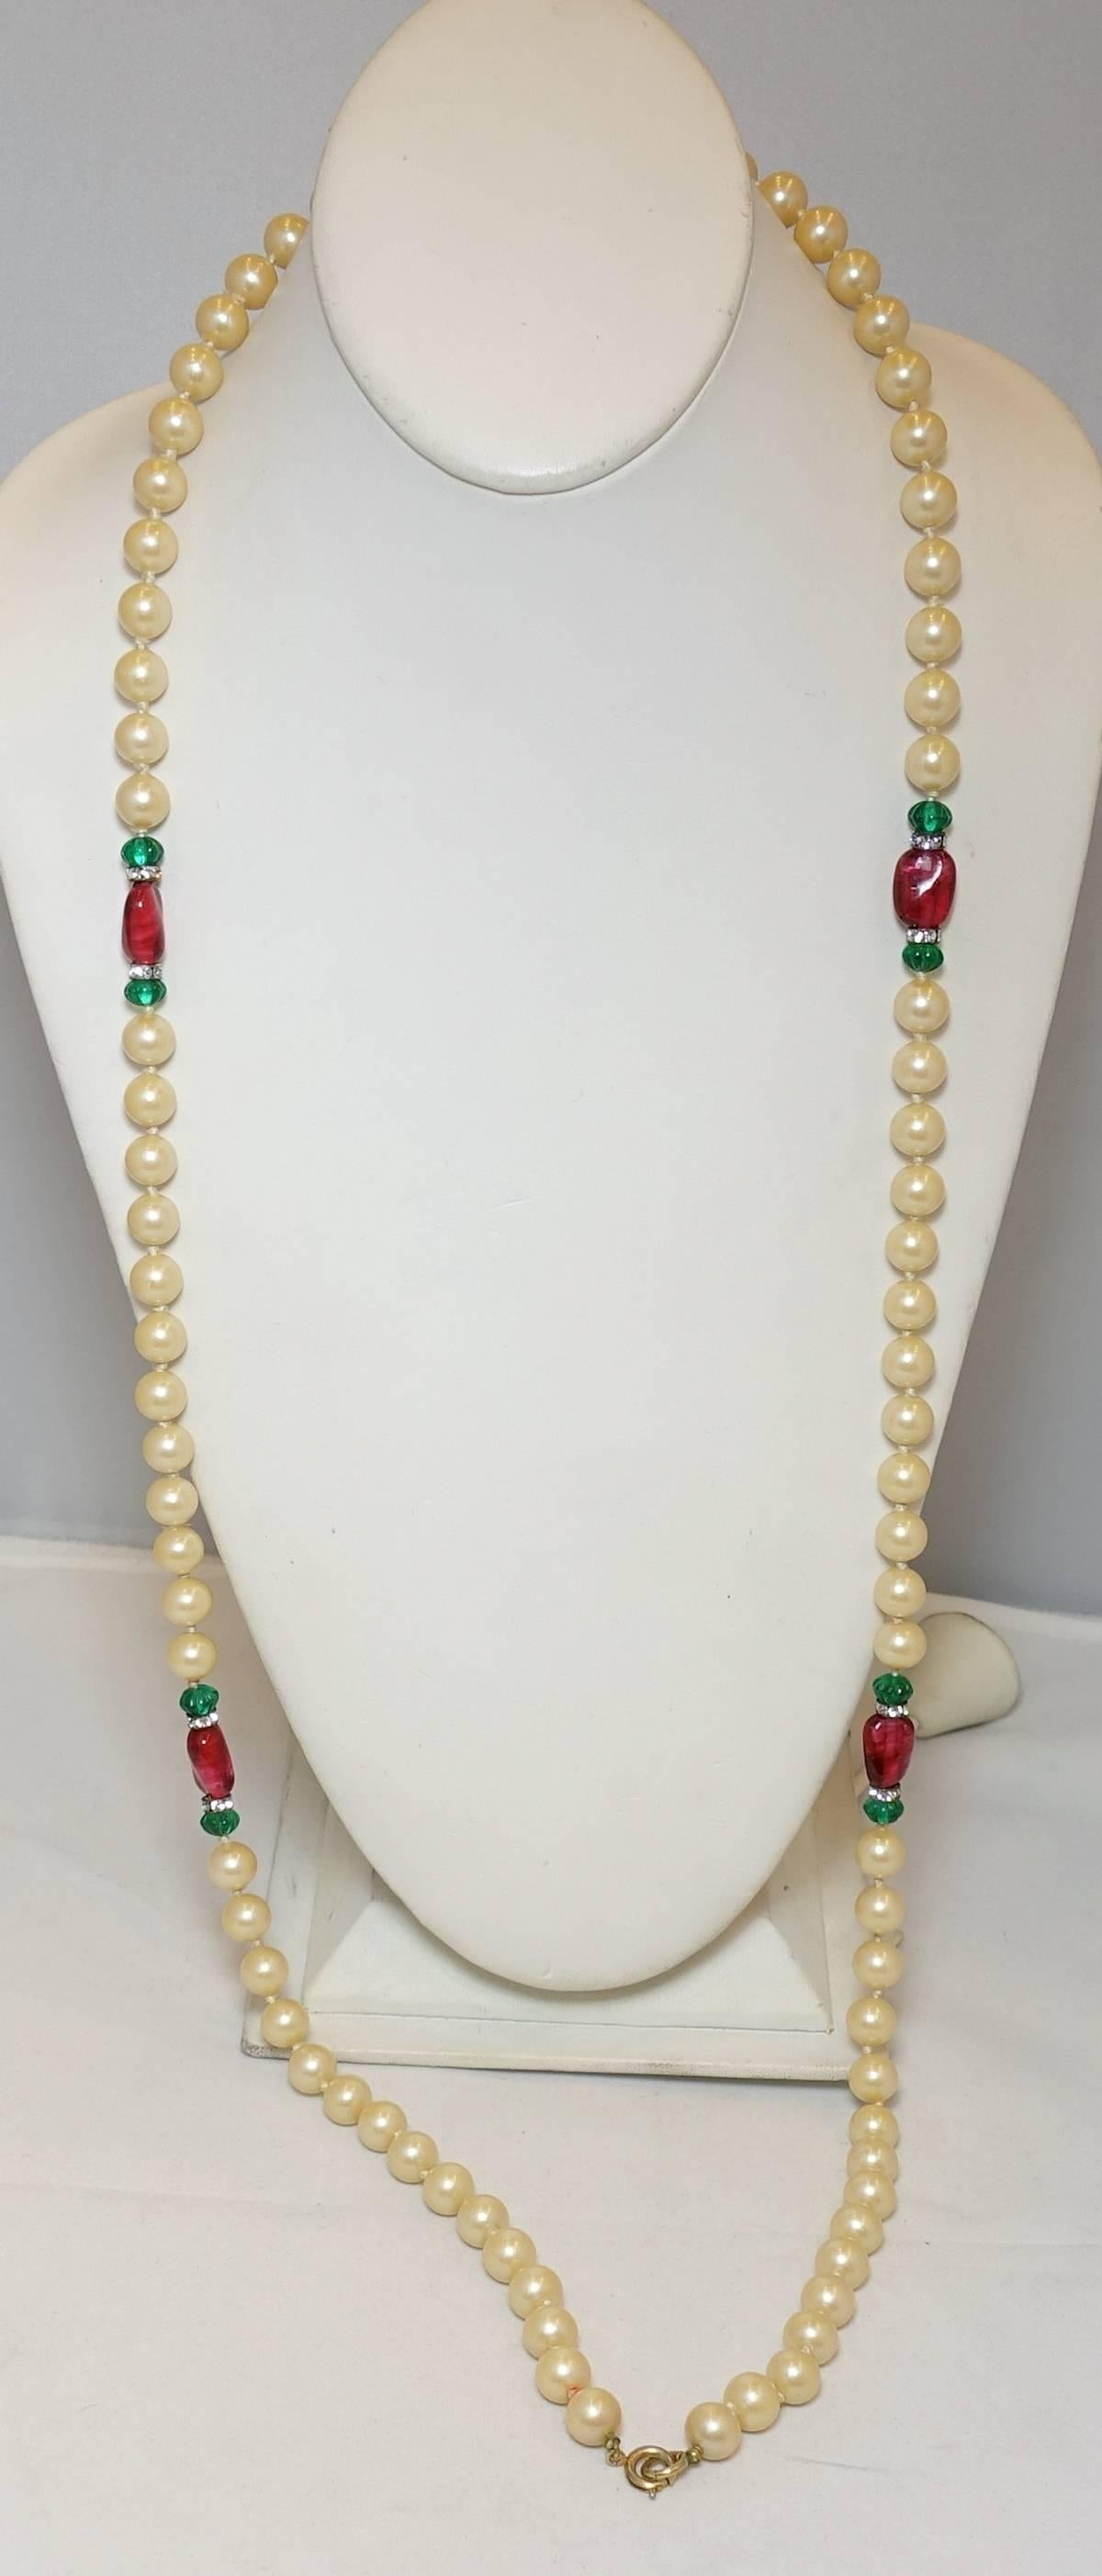 This vintage necklace features red and green French glass and knotted faux pearls with rhondell accents. This necklace measures 42” x 3/8” with a spring closure and is in excellent condition.